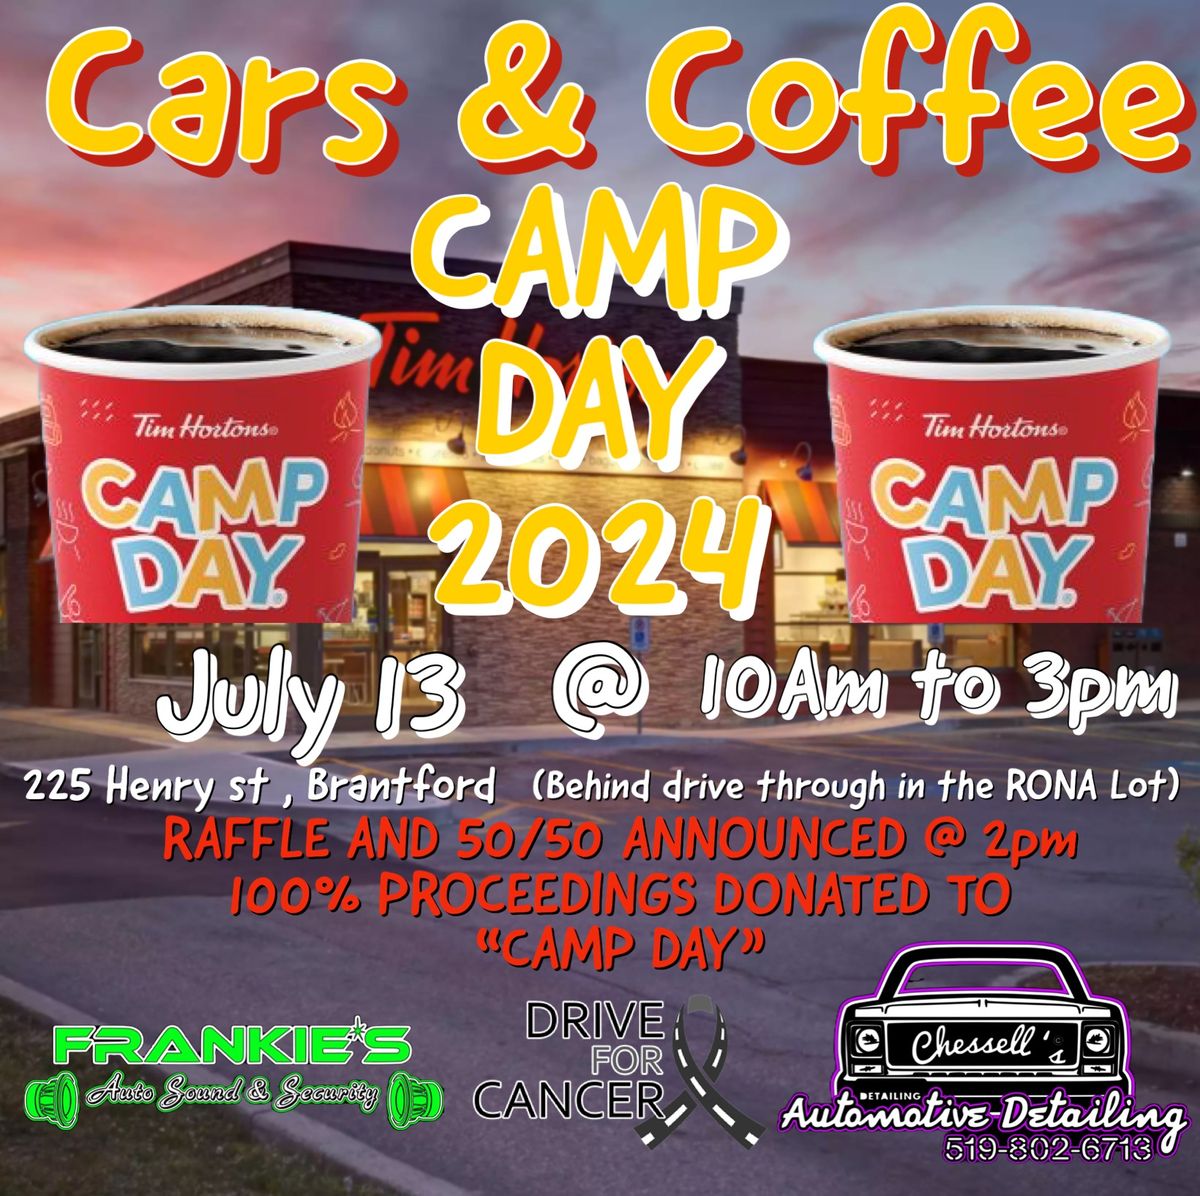 Cars & Coffee for Camp Day 